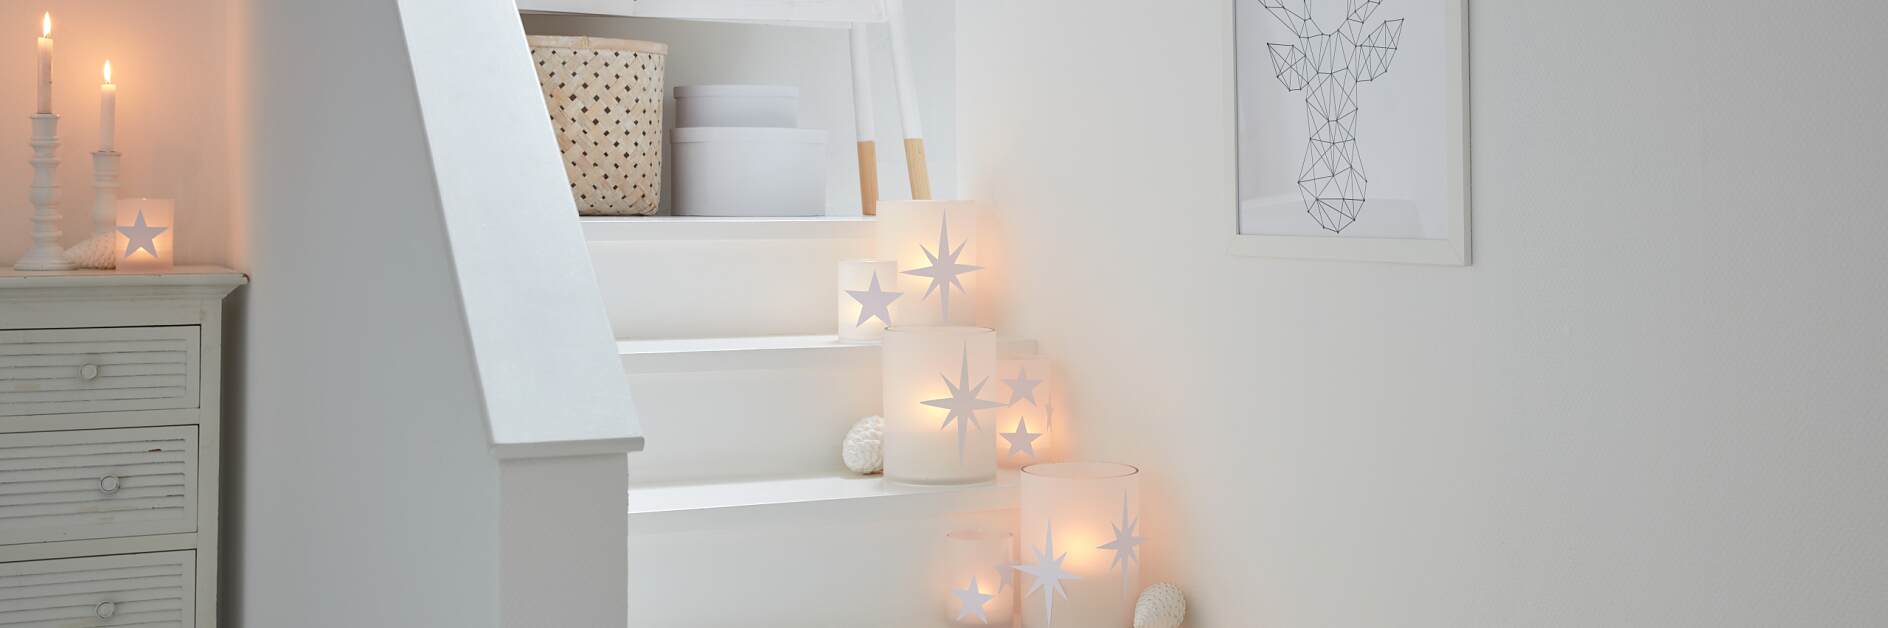 Create your own candle holders with stars!